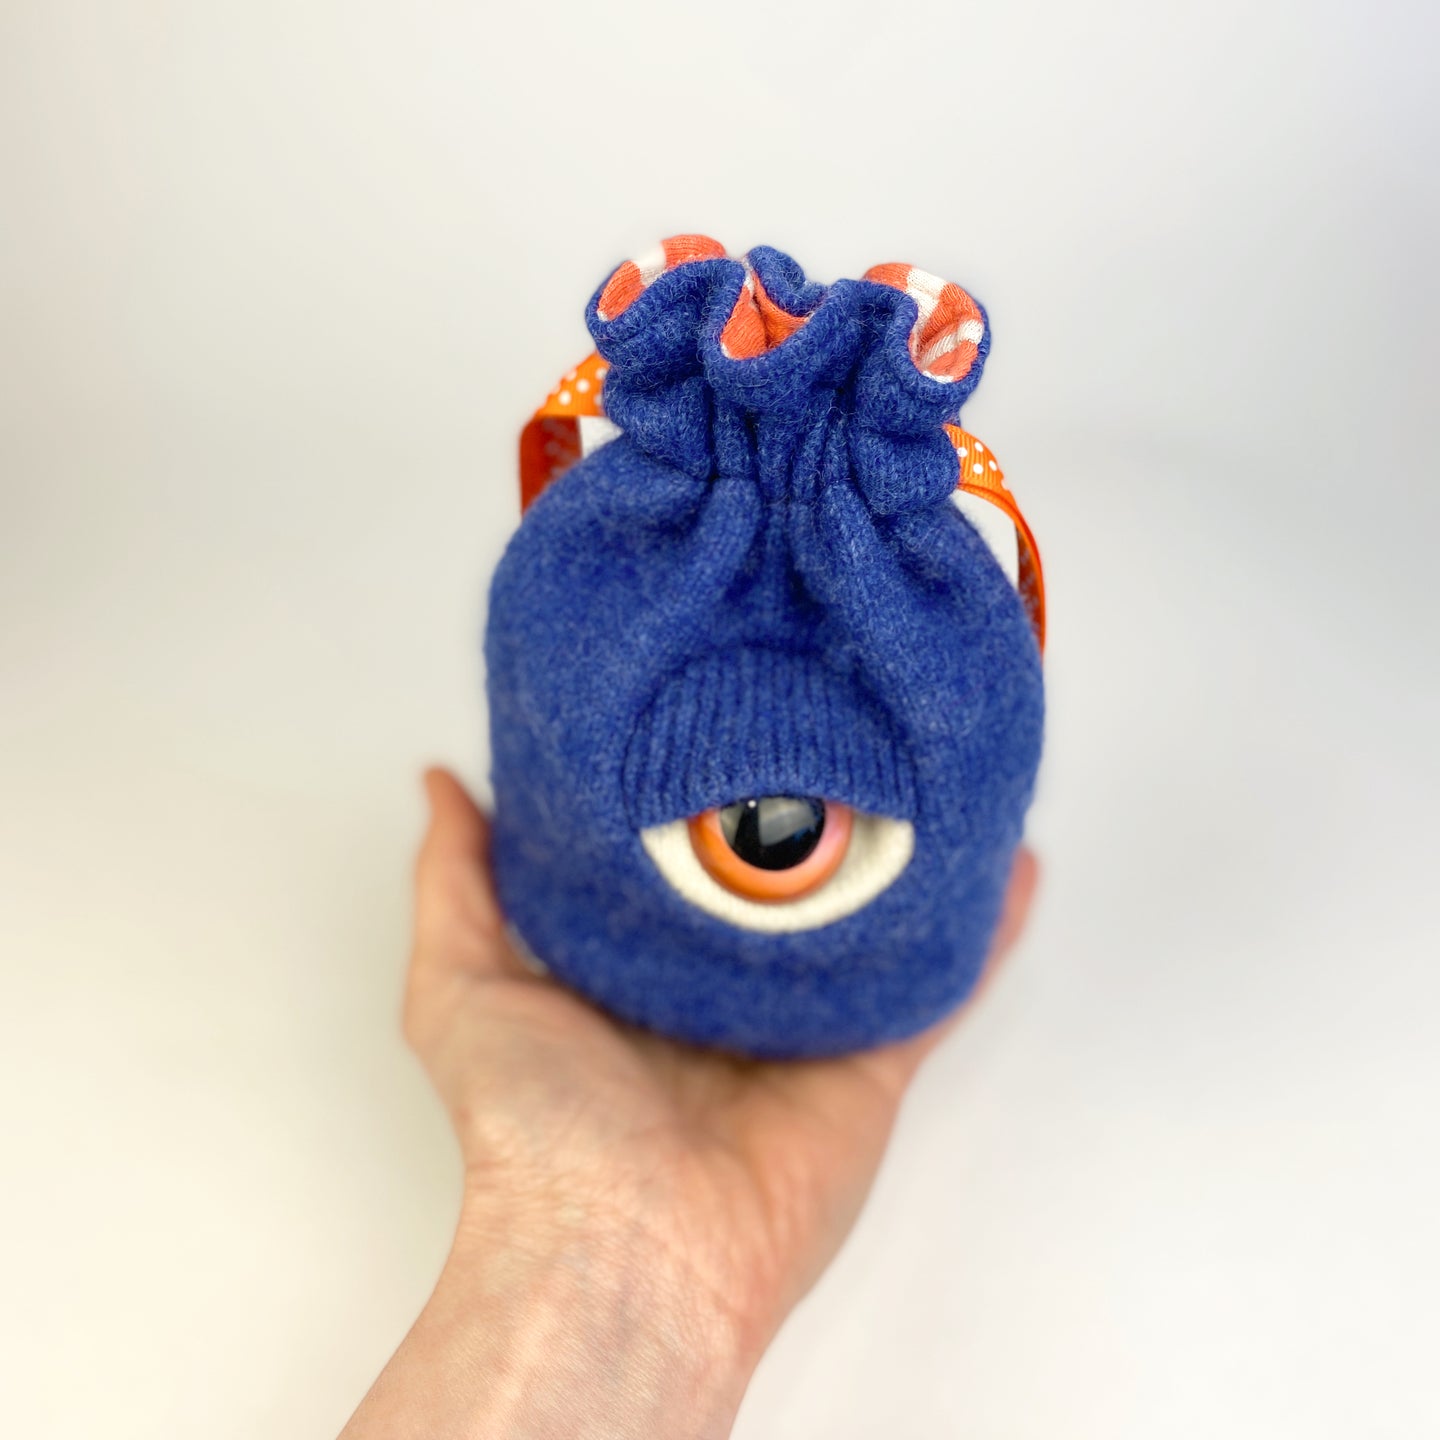 cyclops style dice bag for DnD role playing games